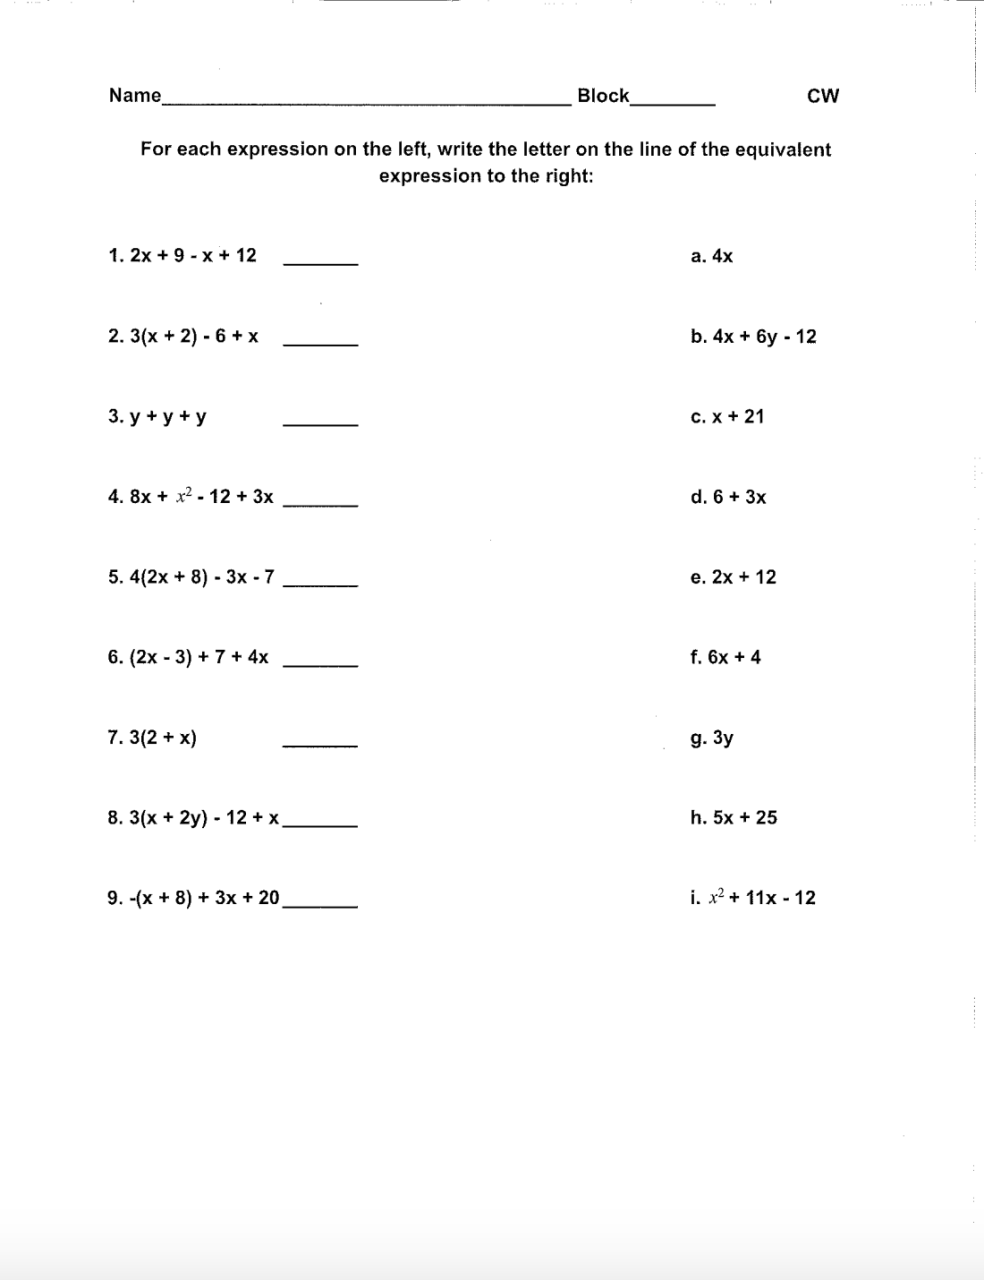 Equivalent Expressions Worksheet Answers